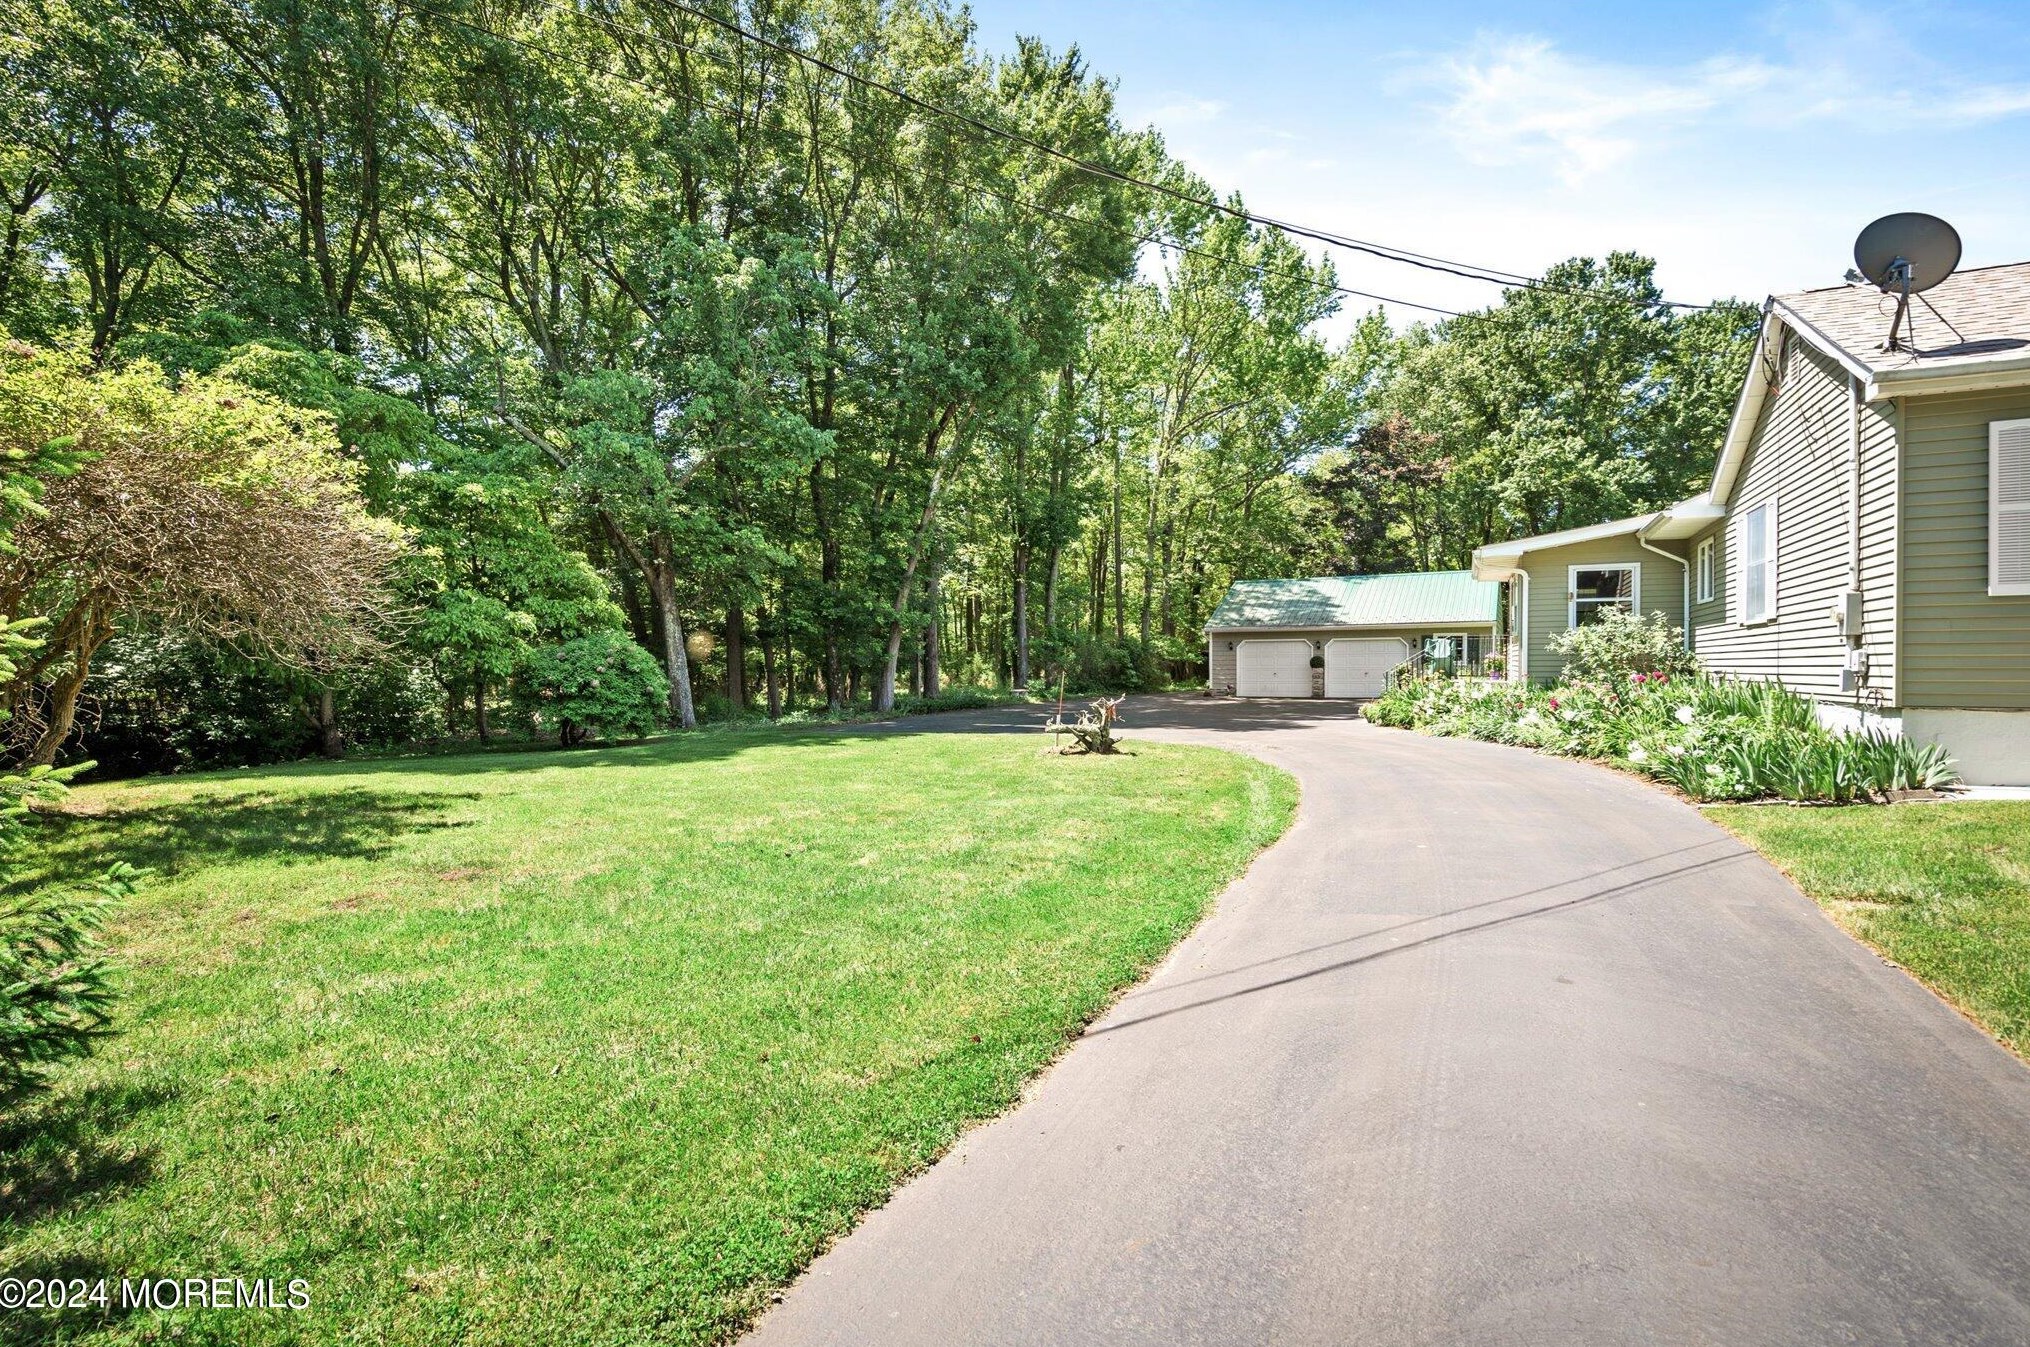 471 Route 539, Plumsted Township, NJ 08533